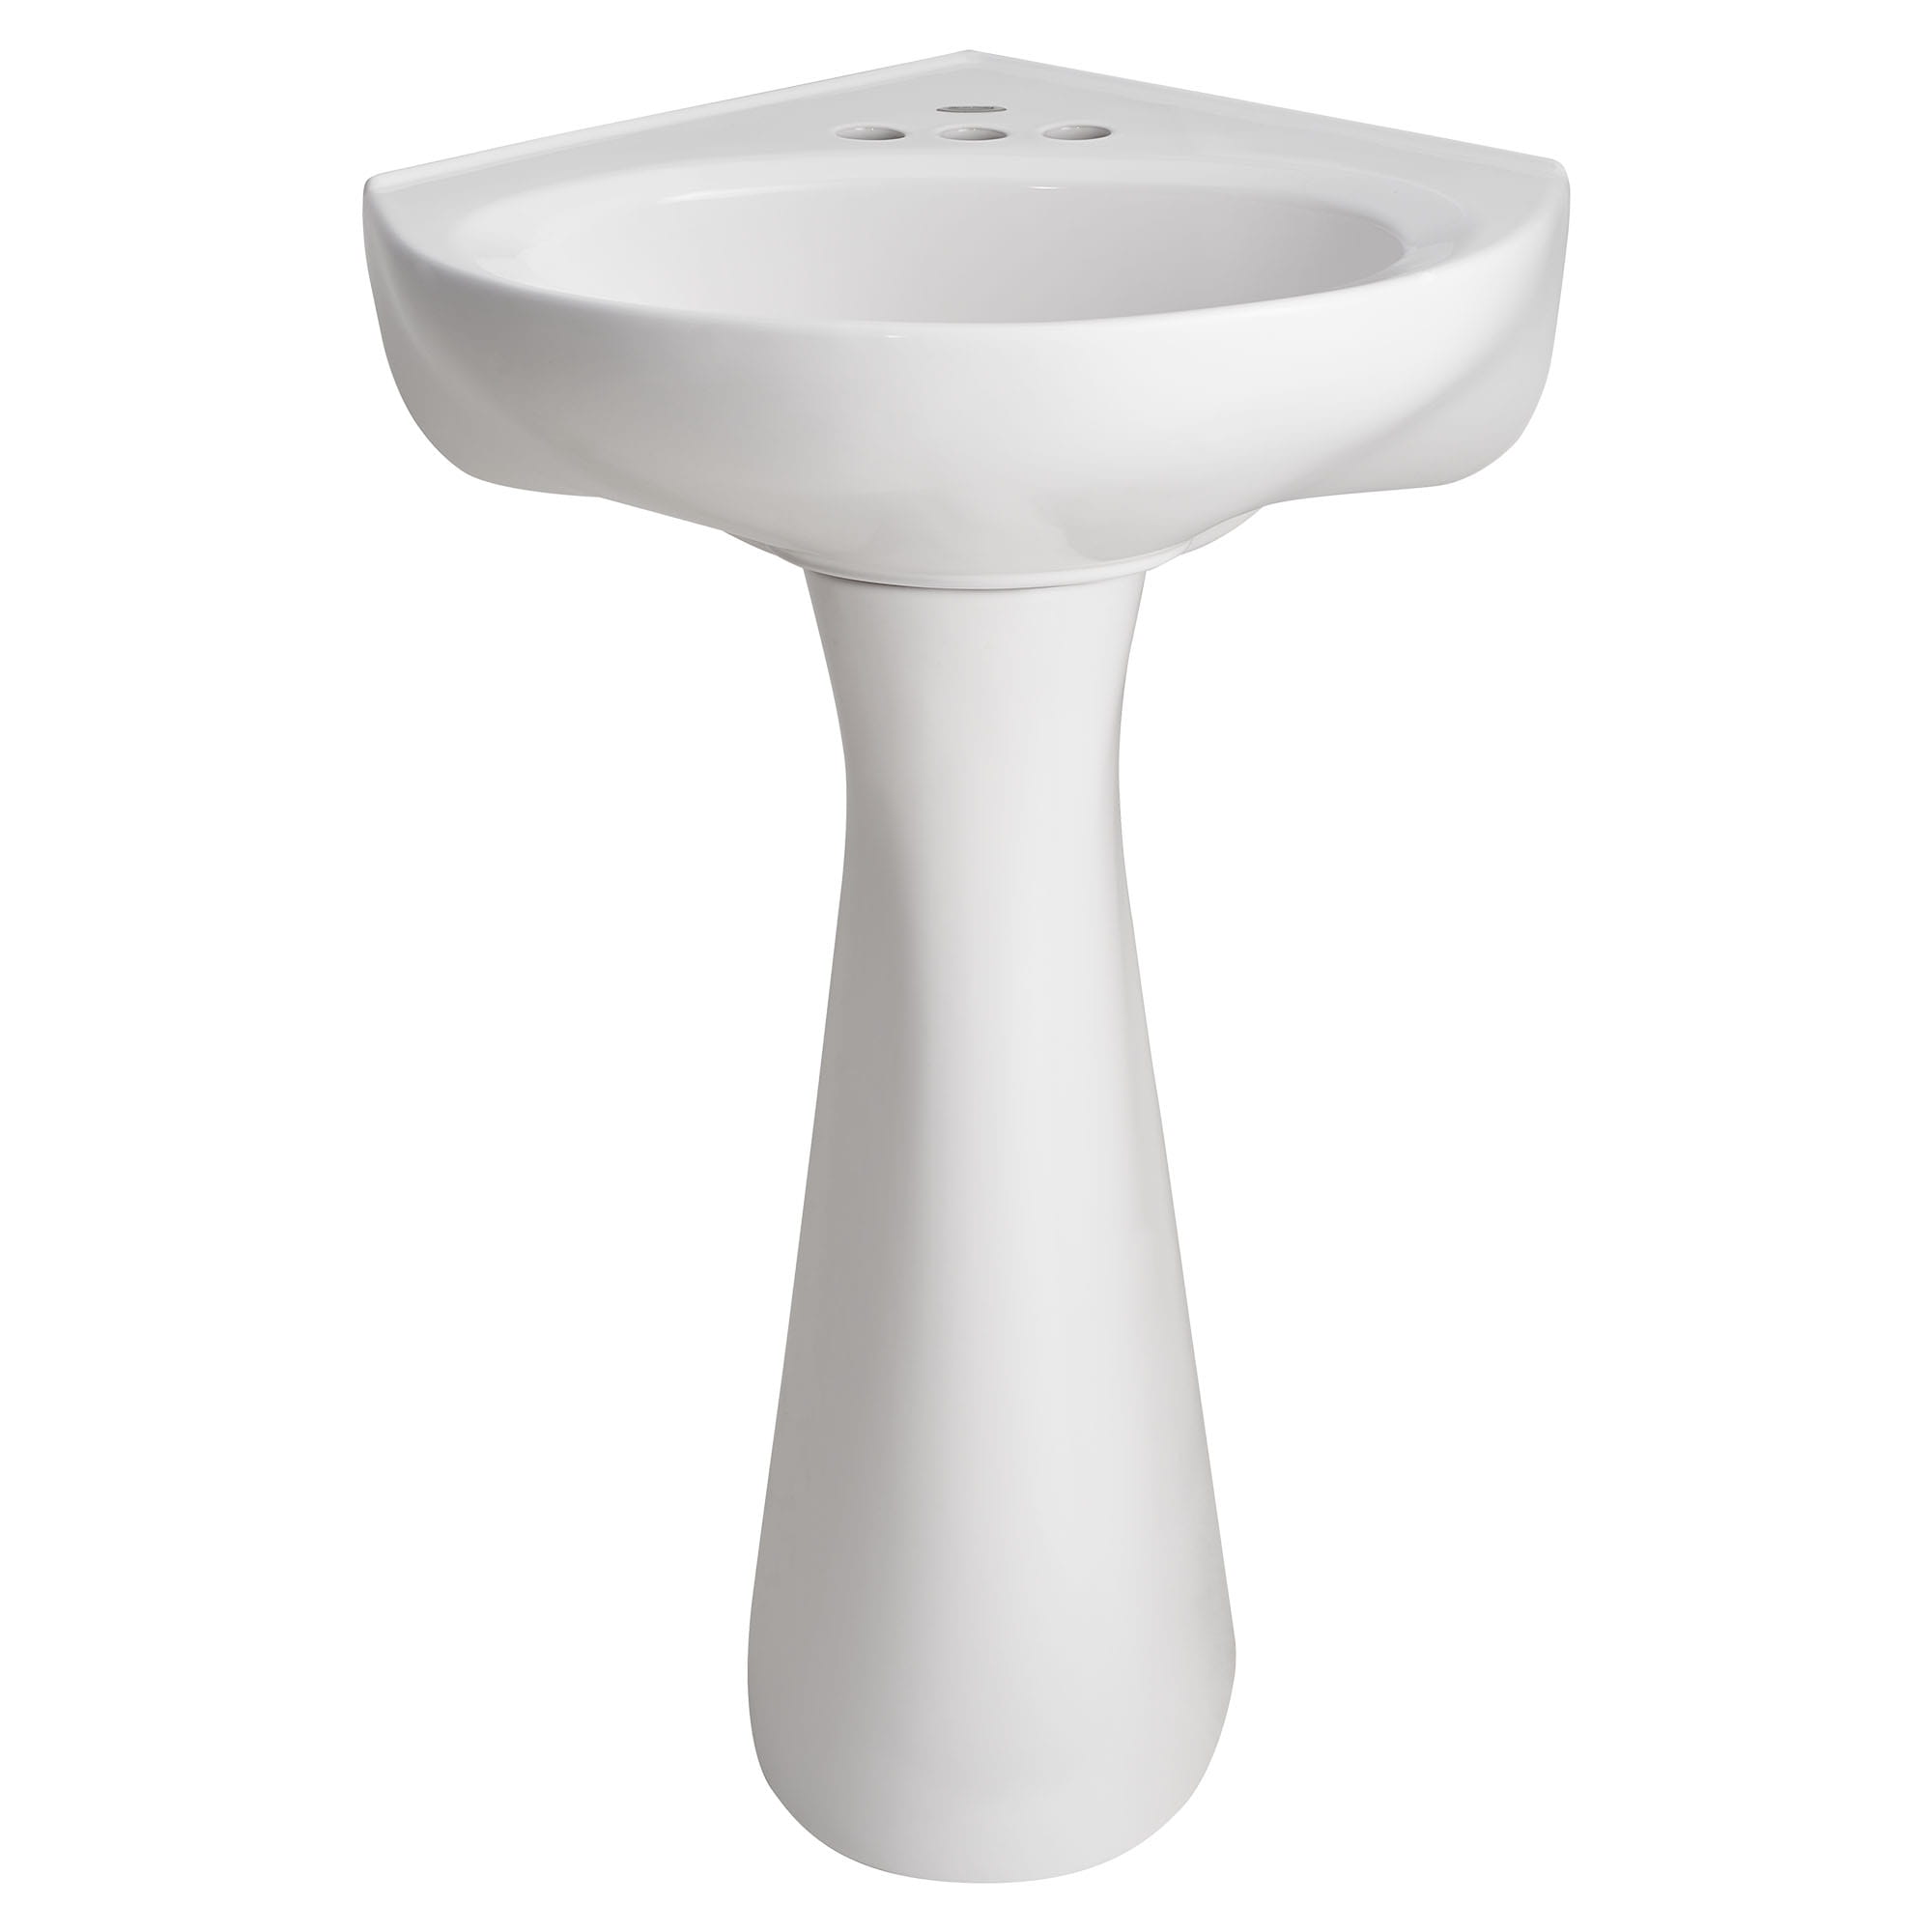 Cornice 4 Inch Centerset Pedestal Sink Top and Leg Combination WHITE